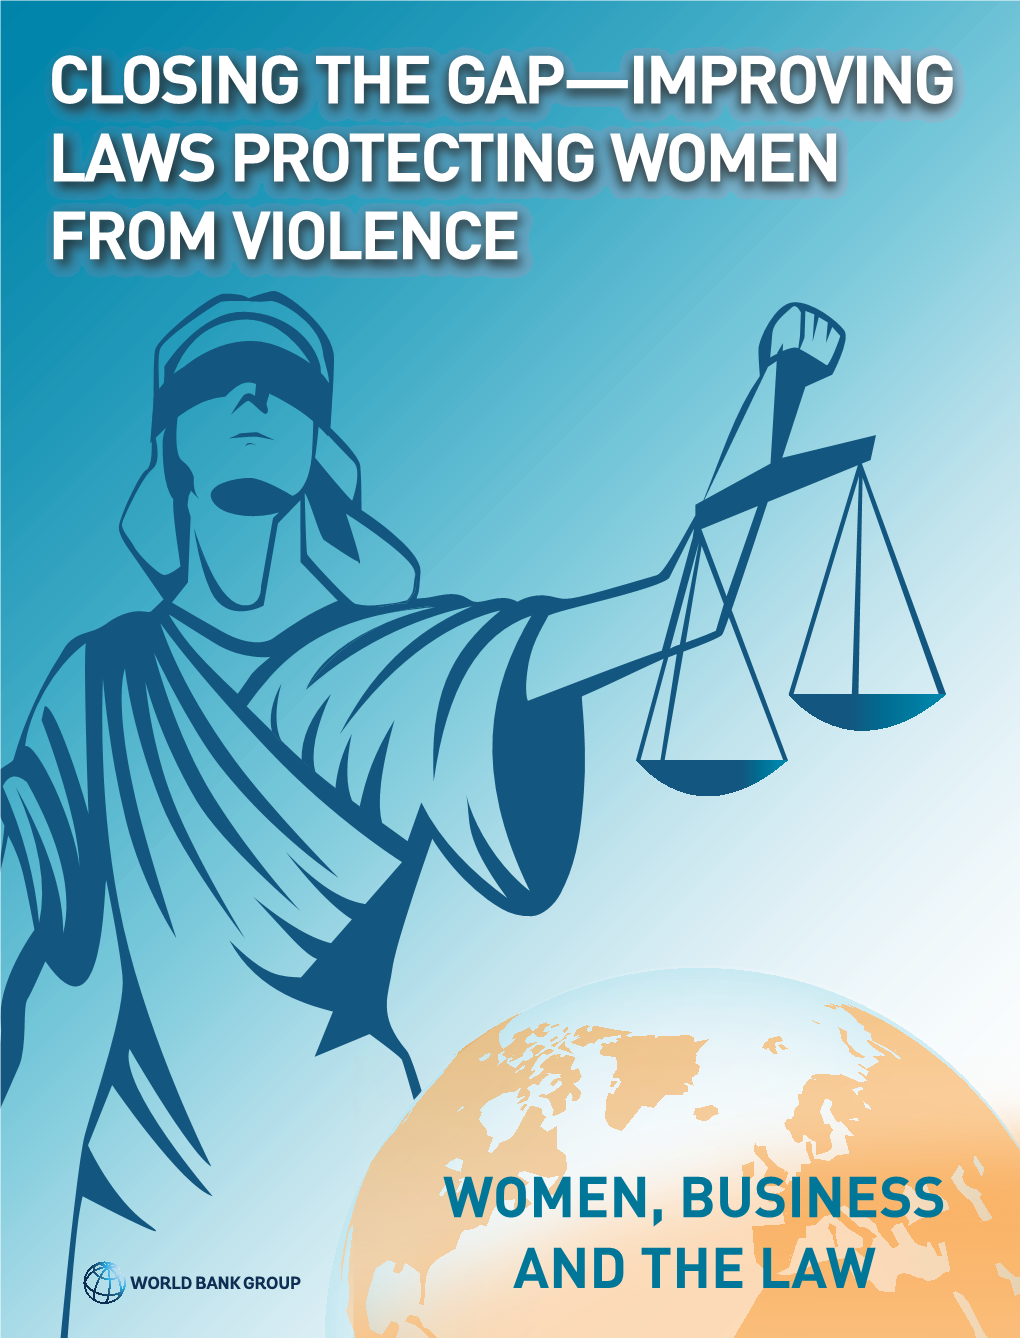 Improving Laws Protecting Women from Violence